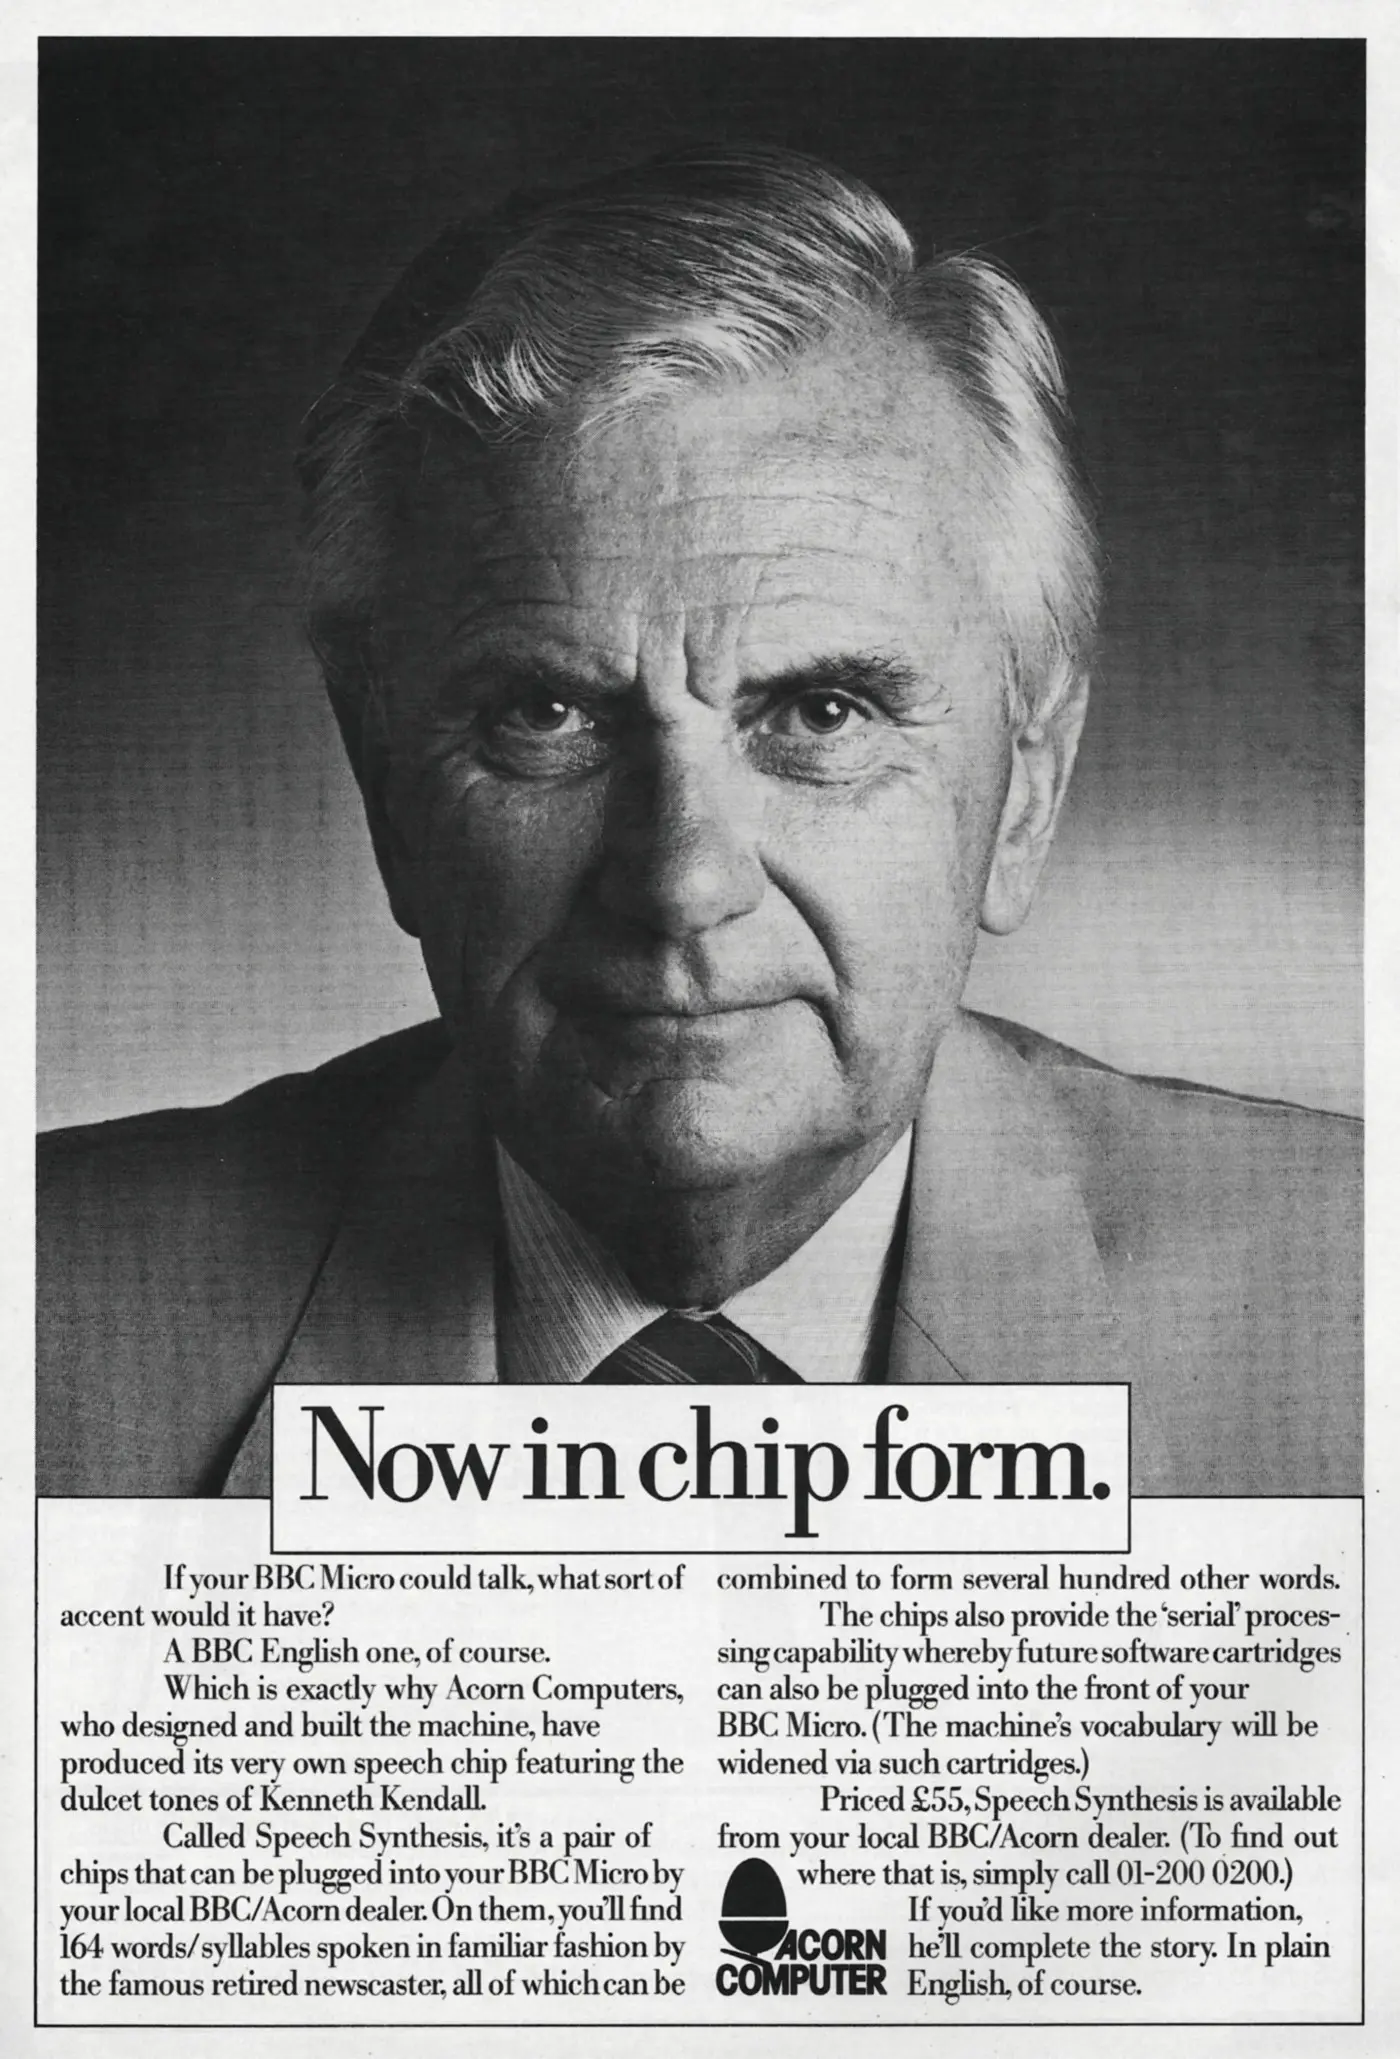 Acorn Advert: Kenneth Kendall: Now in chip form, from Personal Computer News, 25th August 1983